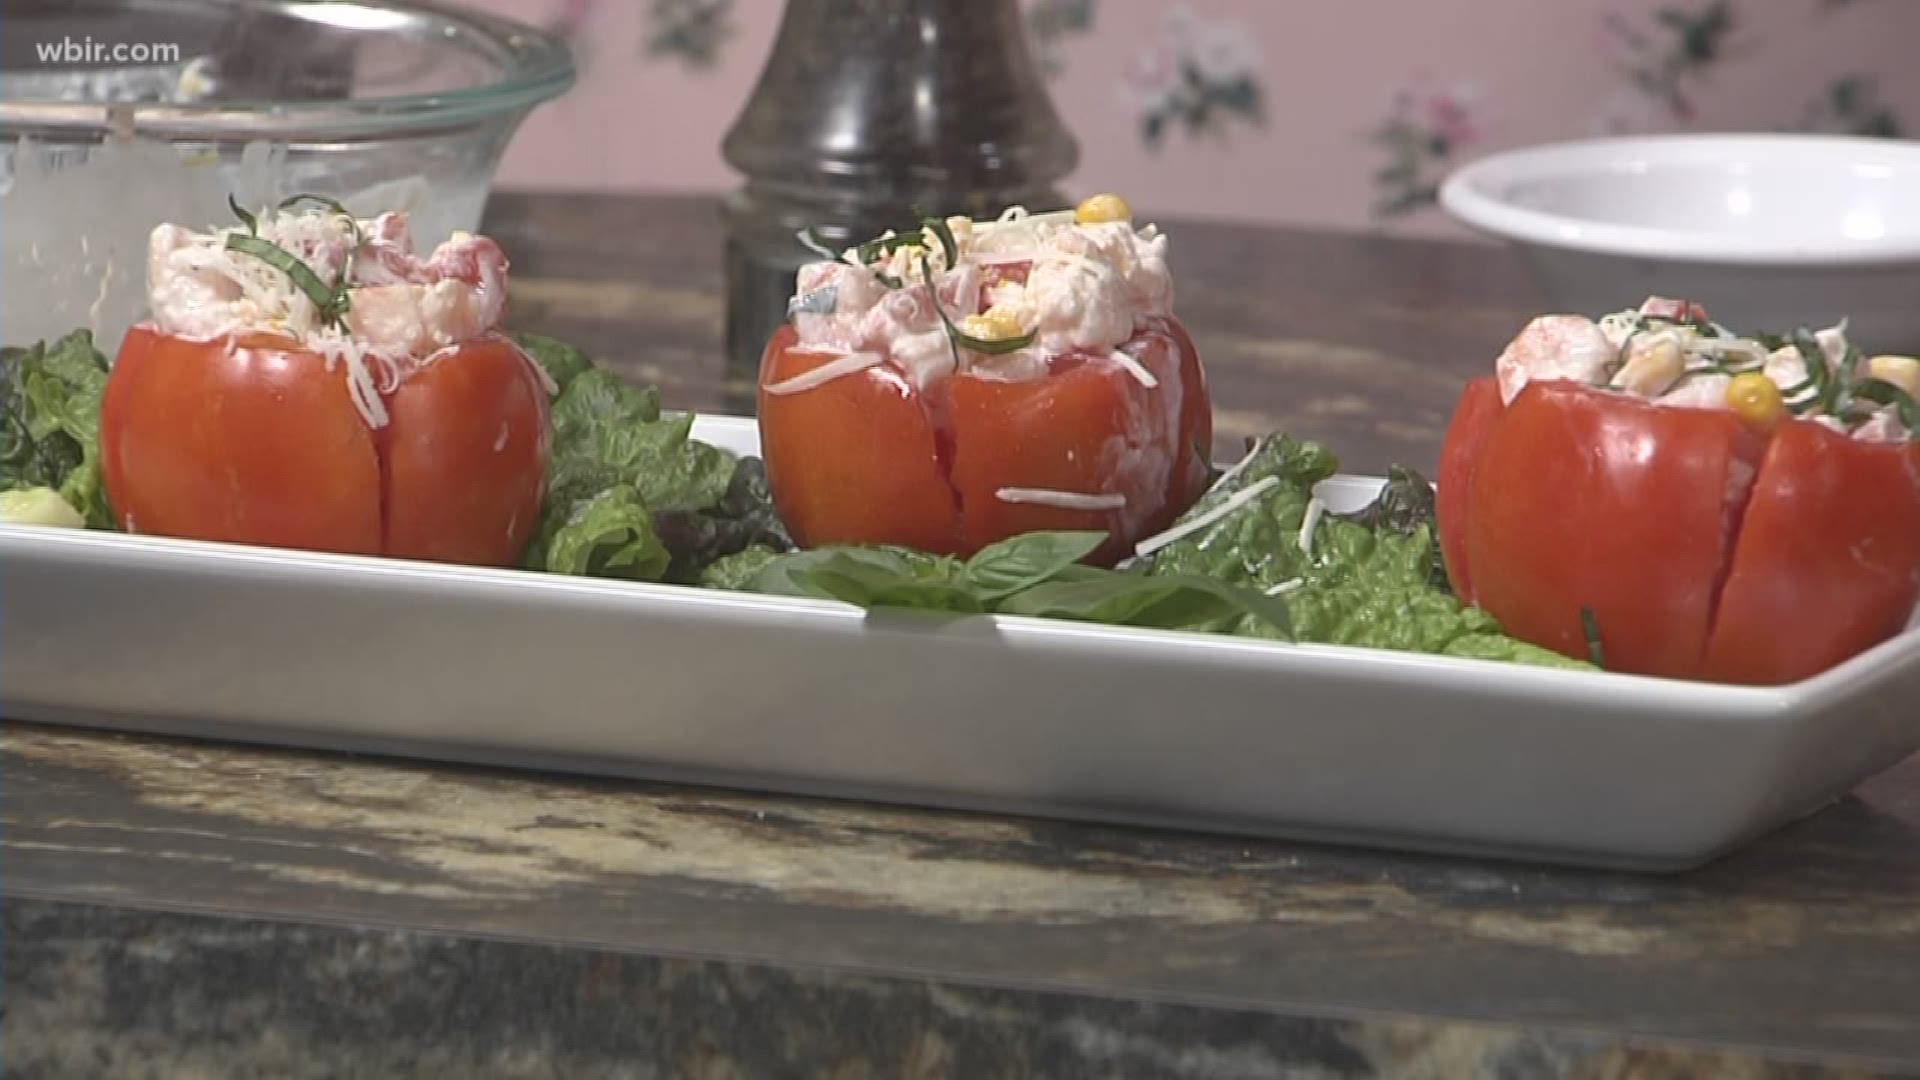 Terri Geiser joins me now from the Glass Bazaar. And we've got a stuffed tomato recipe today!